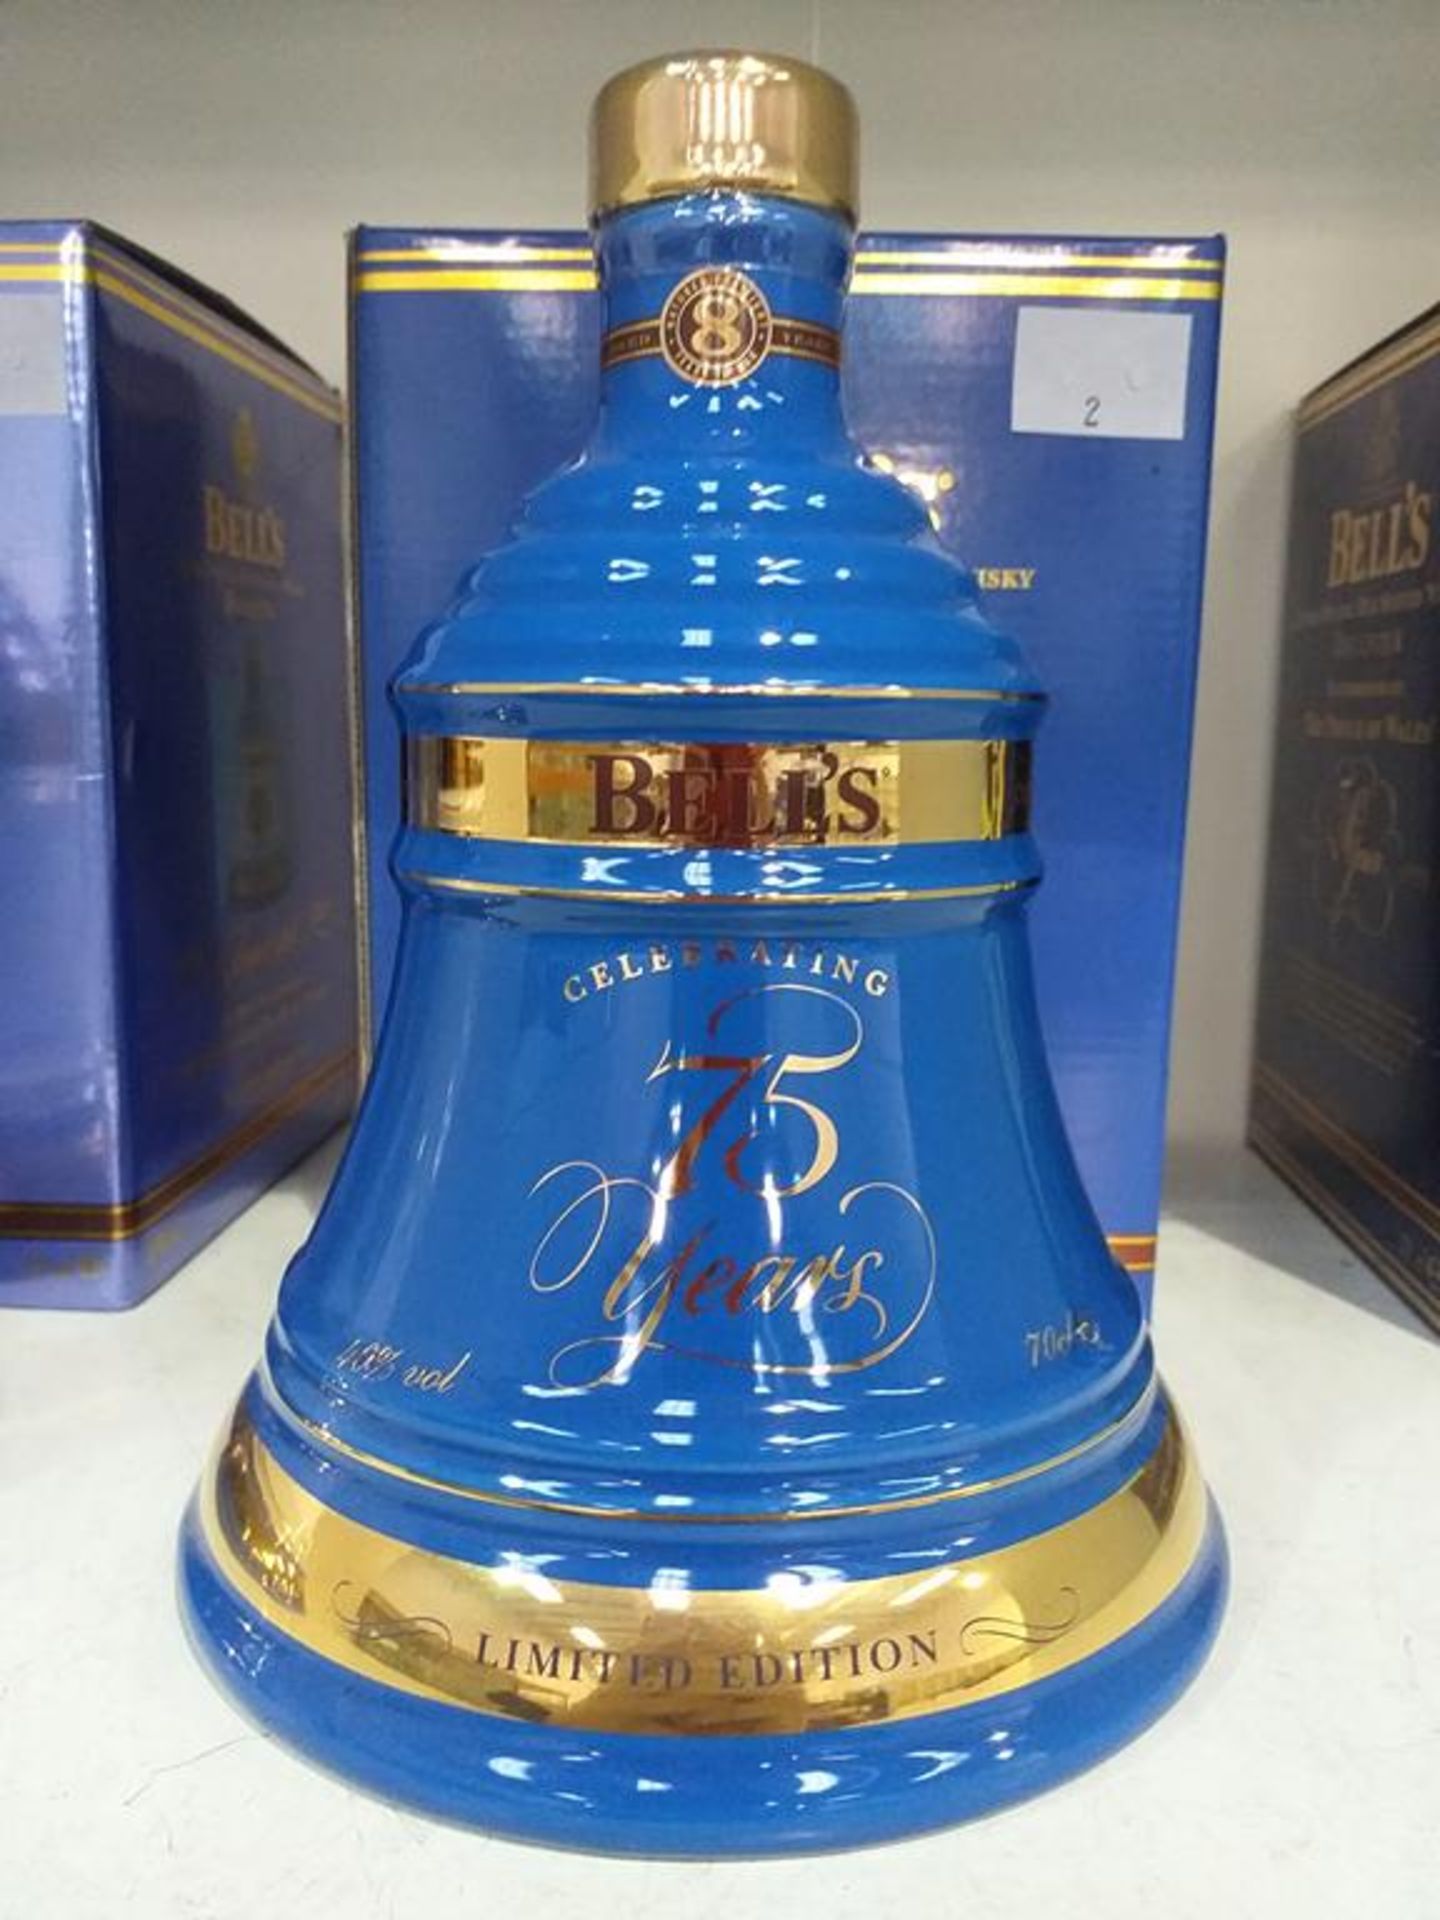 Bell's Extra Special Old Scotch Whisky Decanter celebrating the 75th birthday of HM Queen Elizabeth - Image 2 of 4